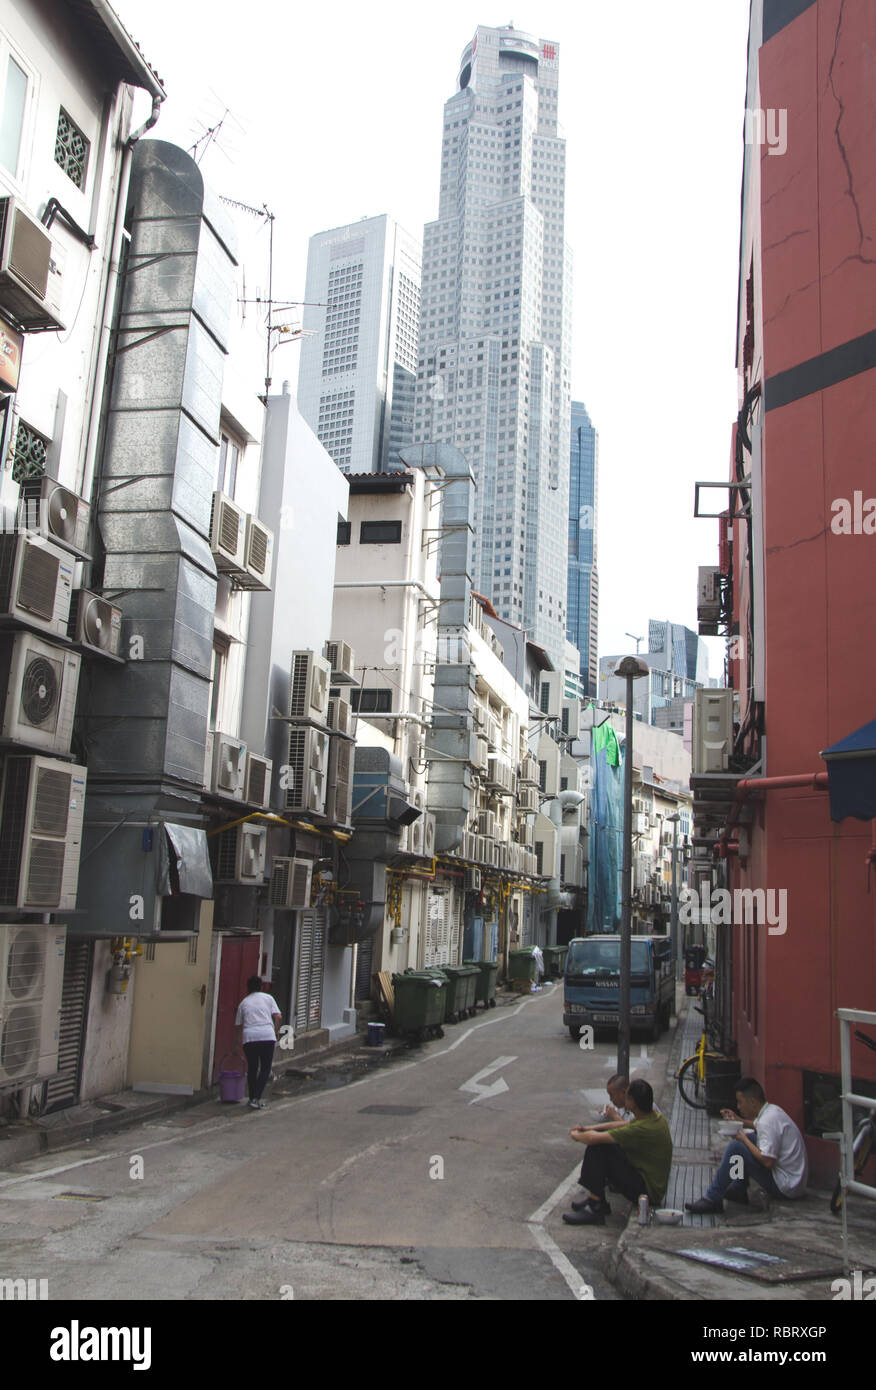 Every city has its back alleys; this one is in wealthy, sophisticated Singapore Stock Photo